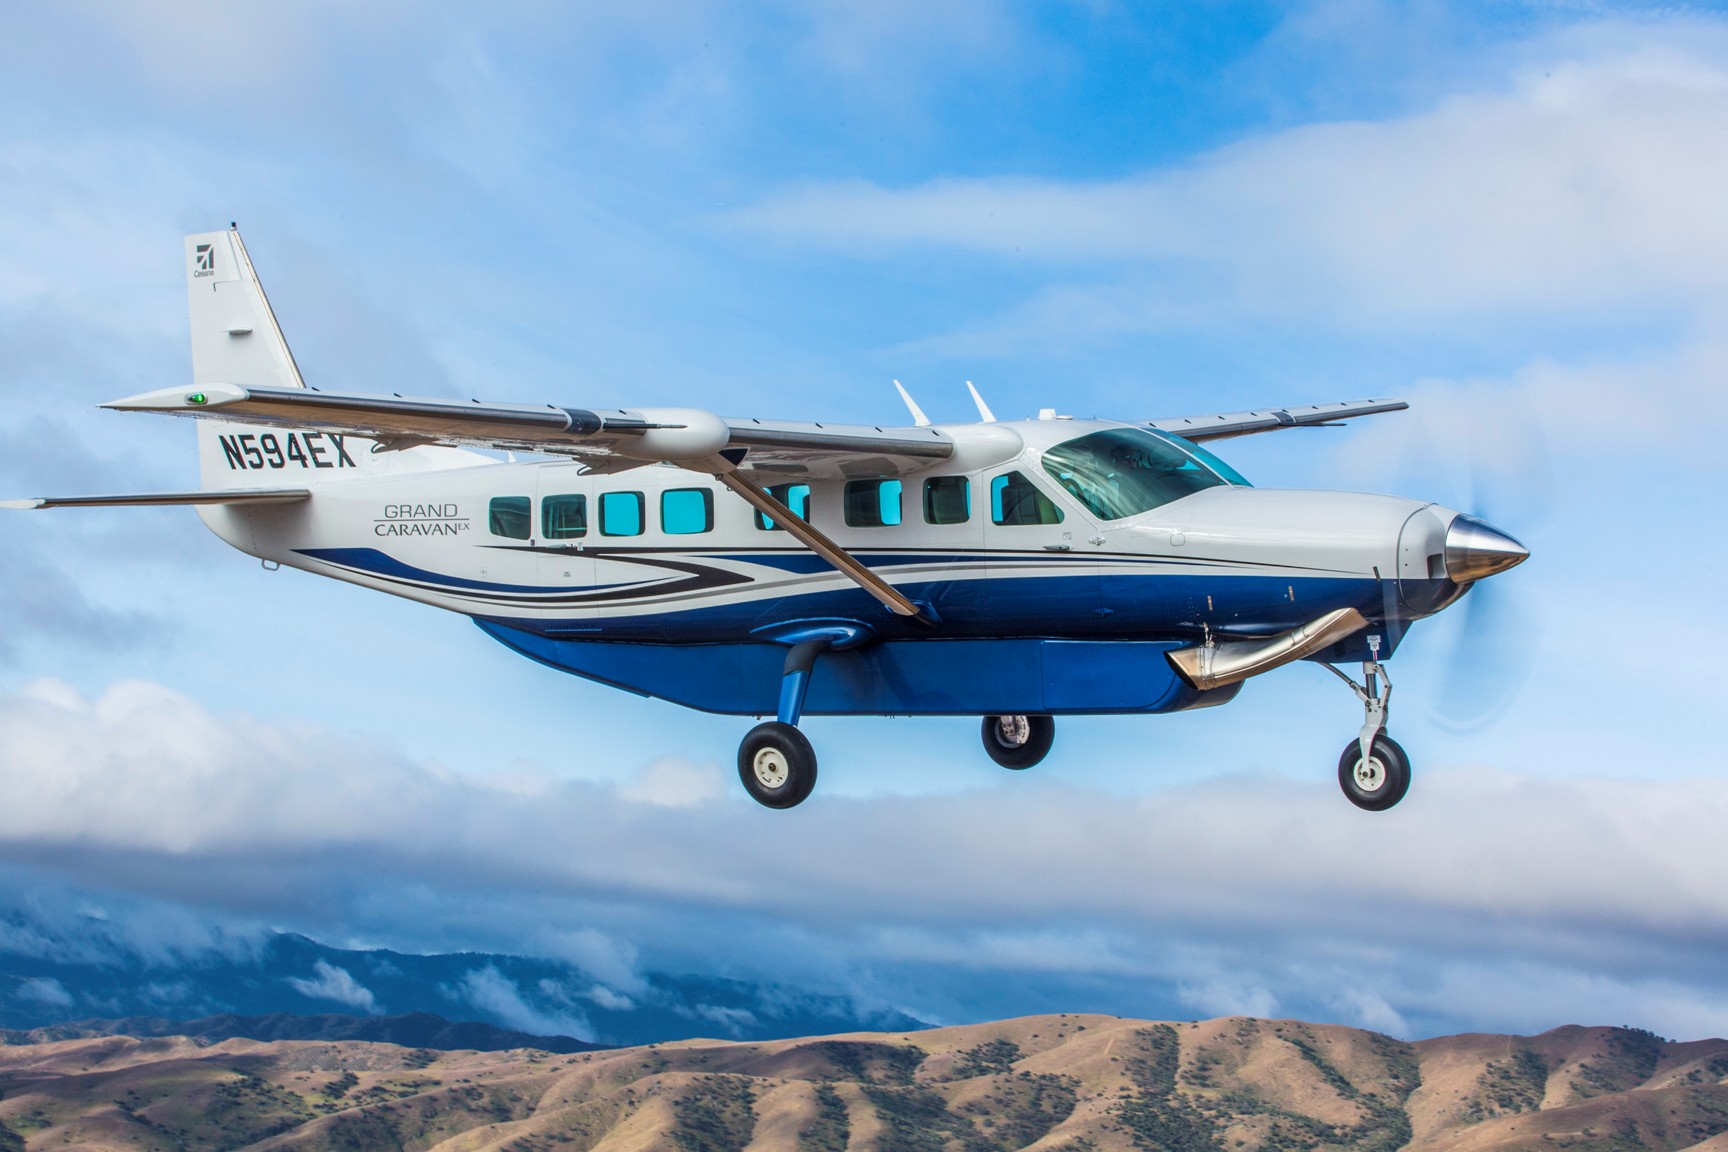 The Cessna Grand Caravan is the perfect choice for hybridisation and electrification